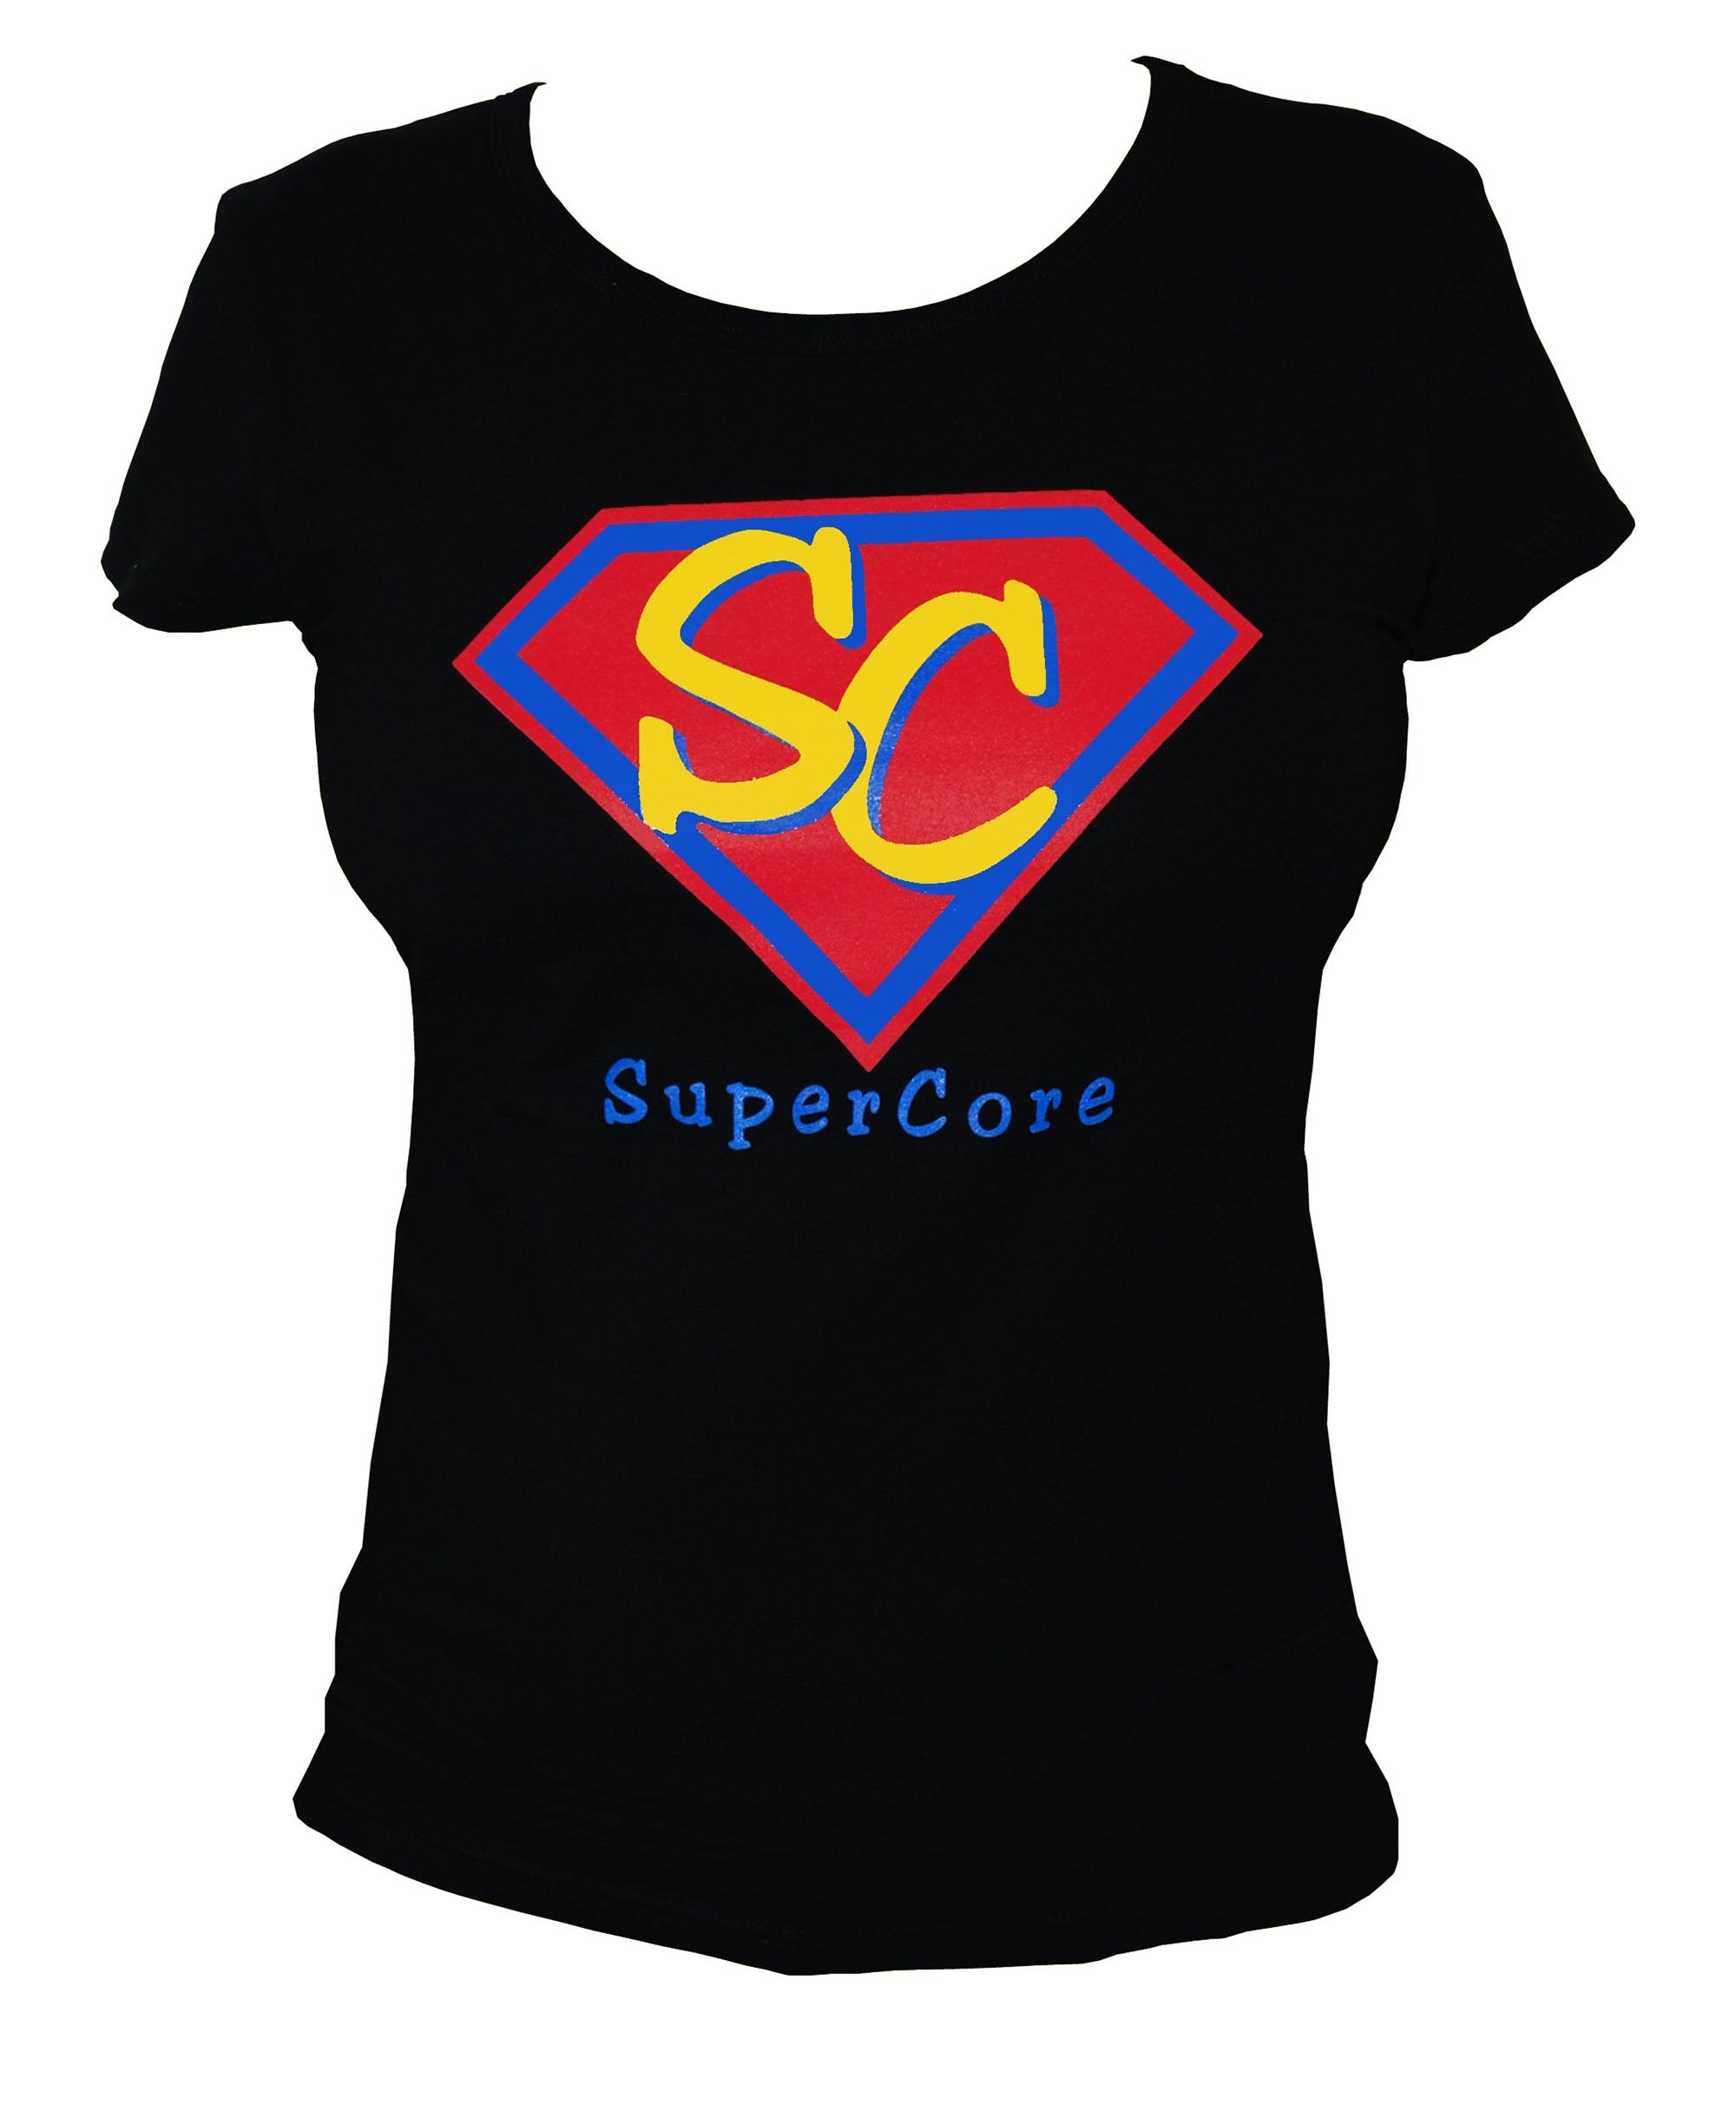 Super Core Top Comfortable Womens Black Graphic Tank or Black Cap Sleeve Graphic Tee